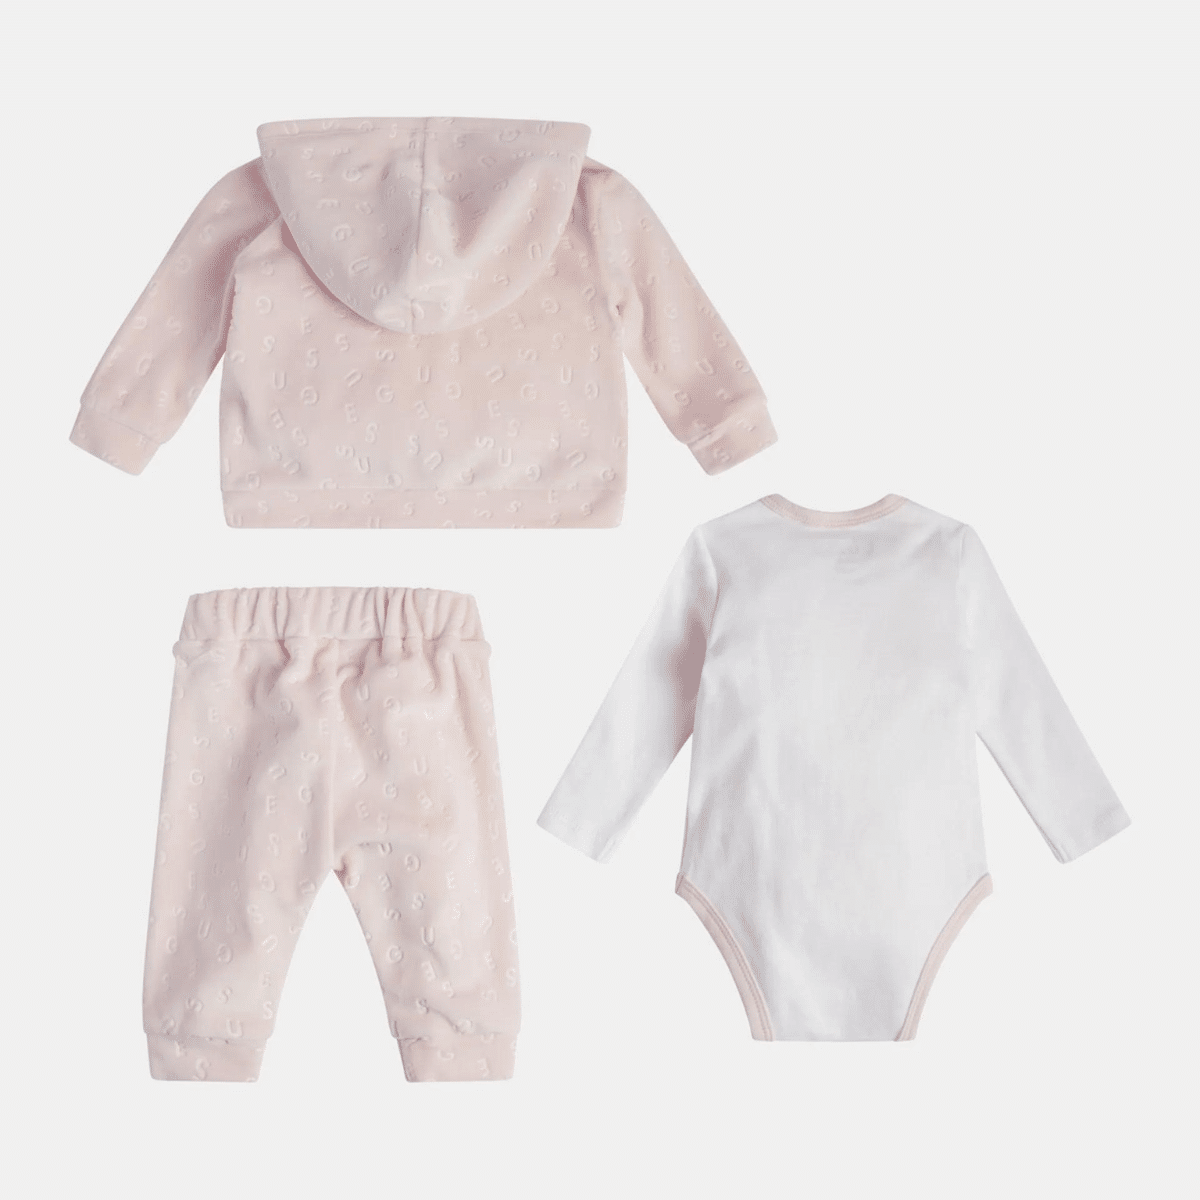 Guess girls baby pale pink outfit back view